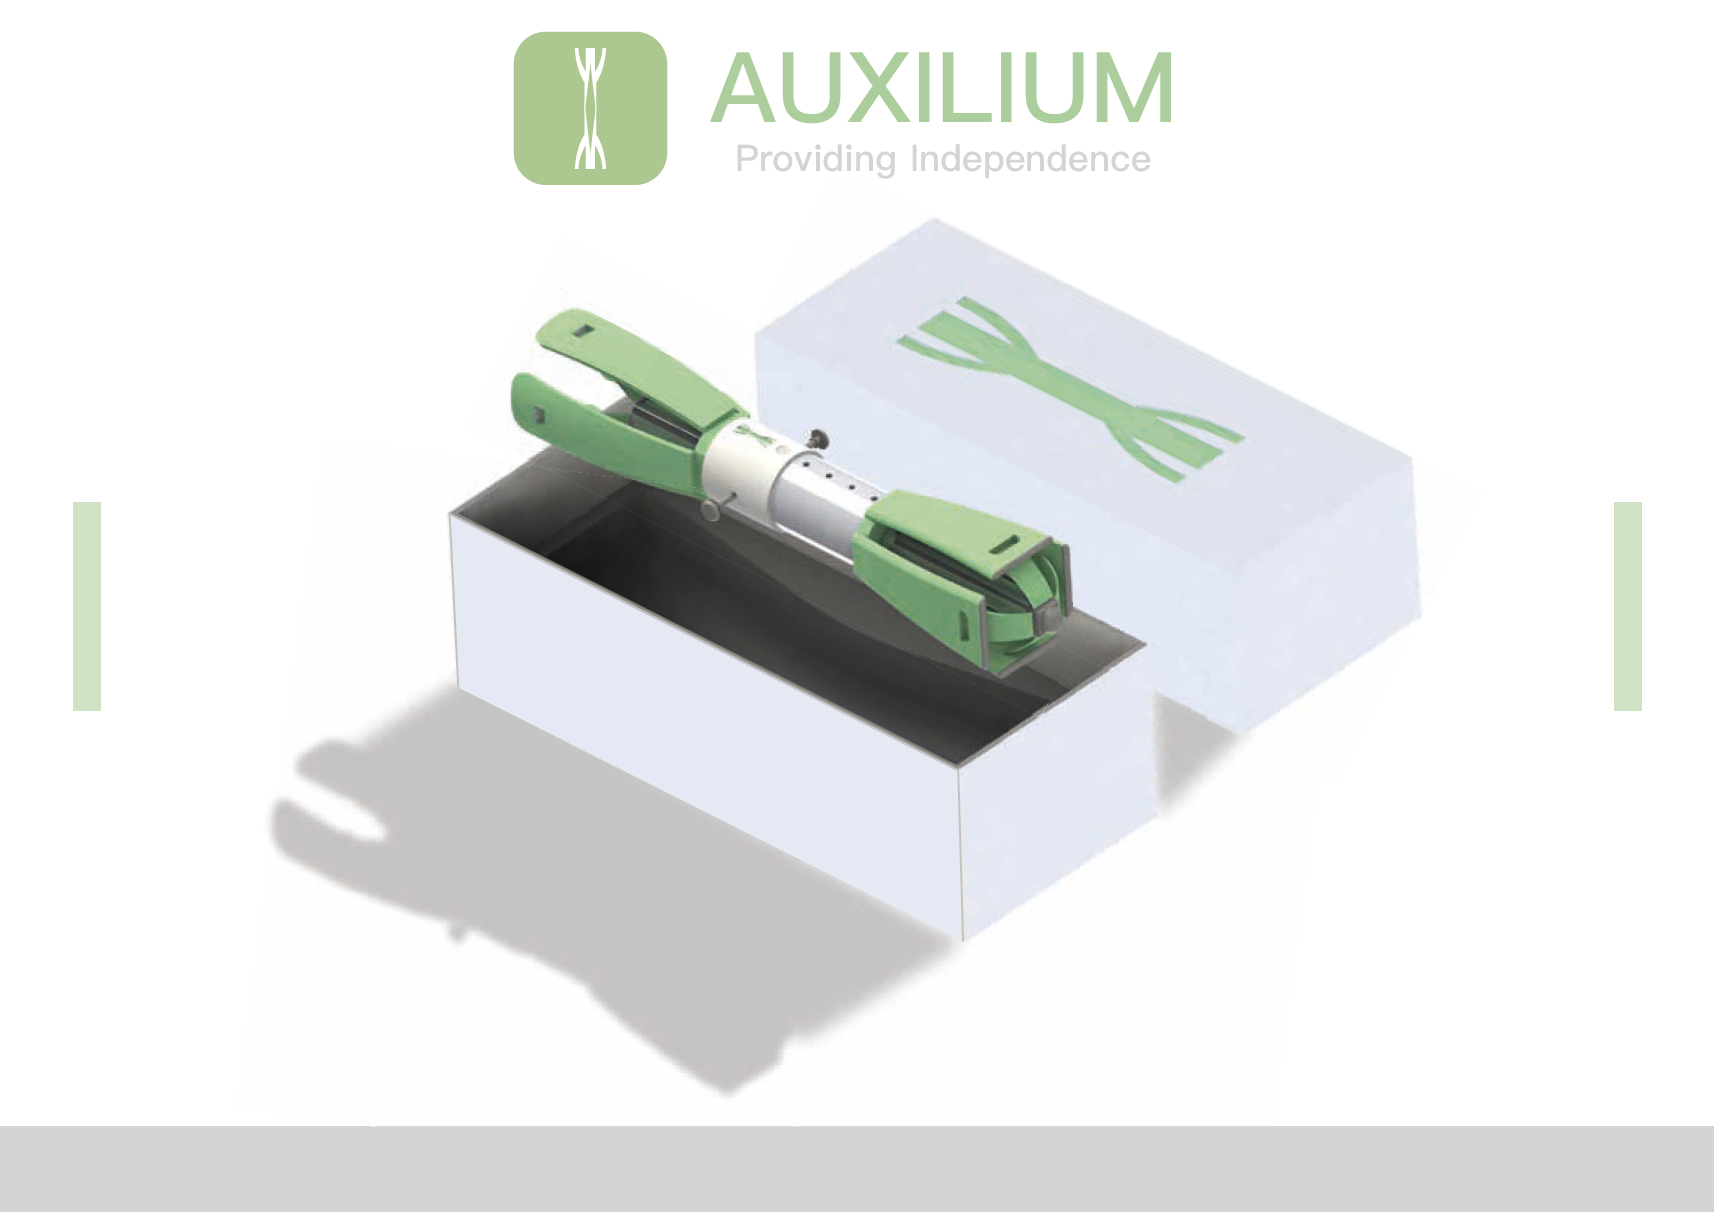 Picture of Lewis' Auxilium design showing prosthetic in packaging